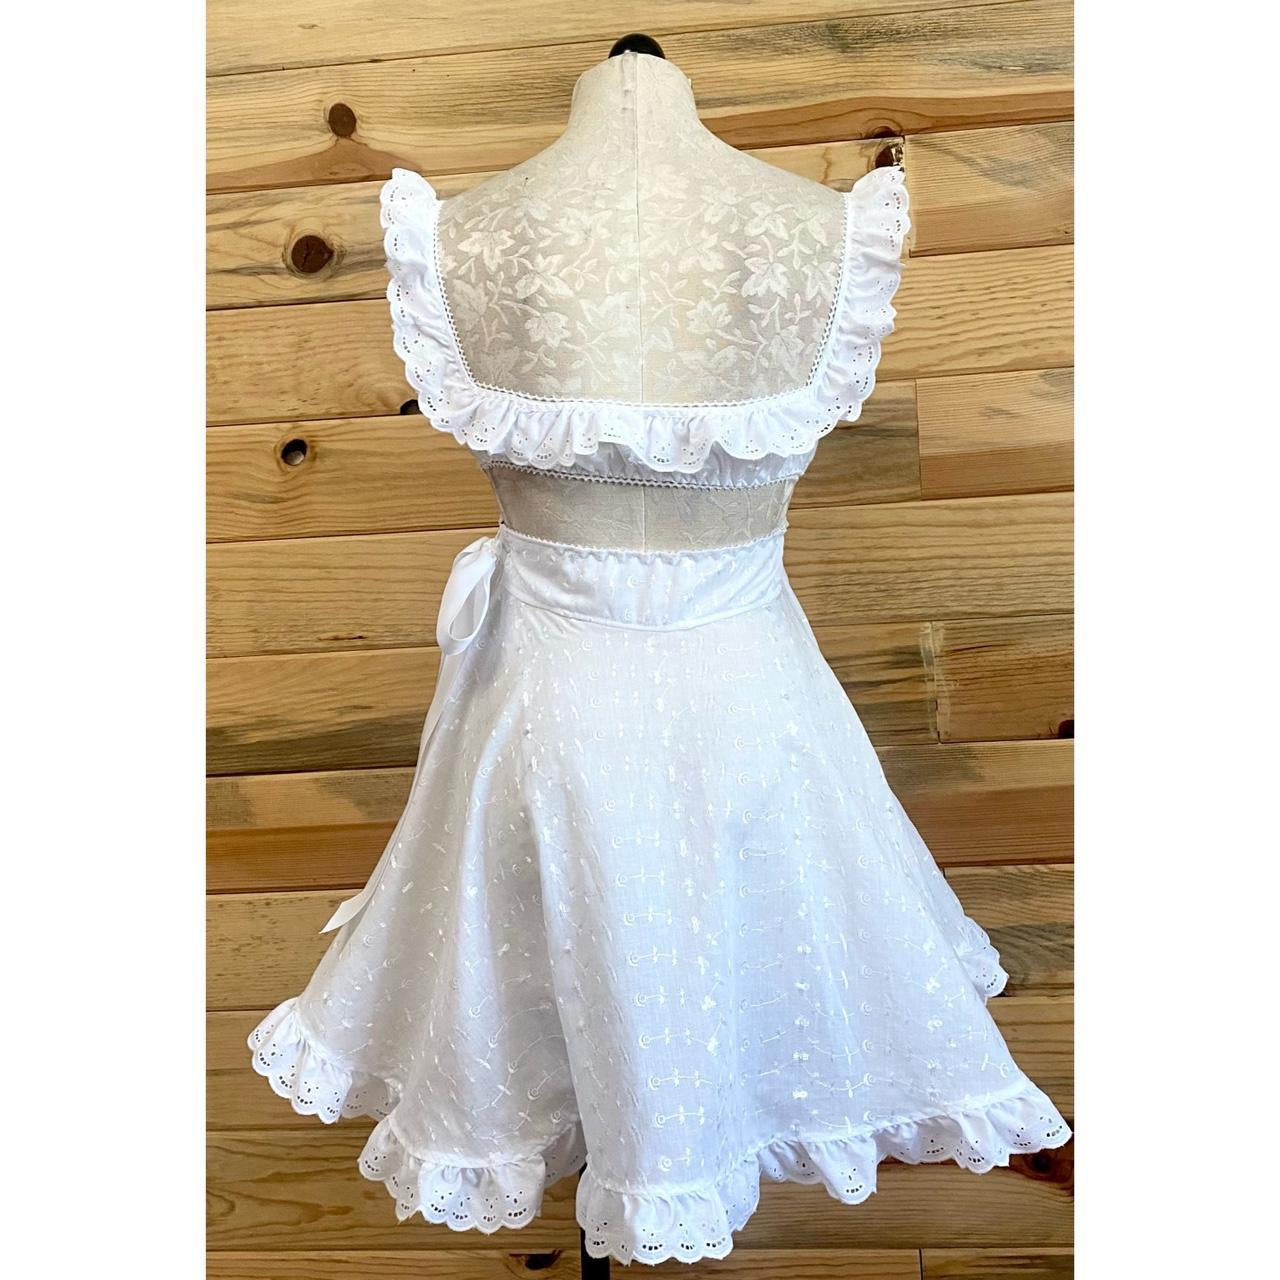 The Dolly Dress in White Eyelet